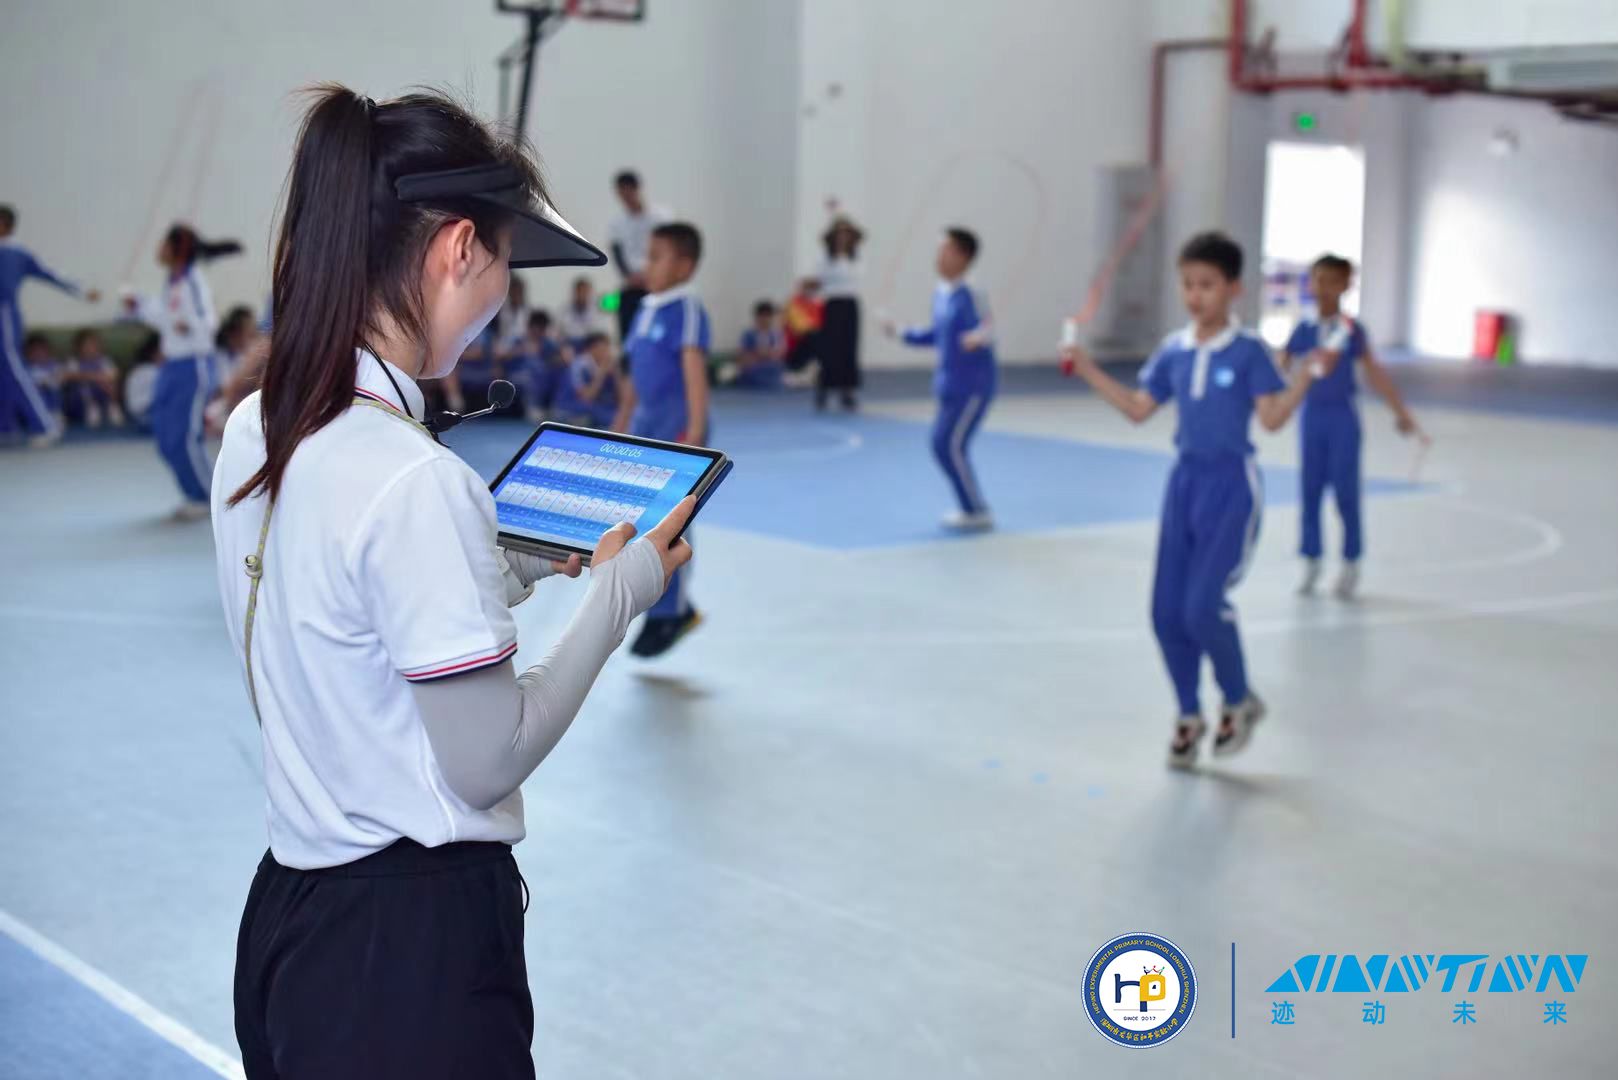 The products designed by AI Motion specialise in analysing sports and health data to provide detailed real-time reports for schools, teachers, coaches, parents and students.